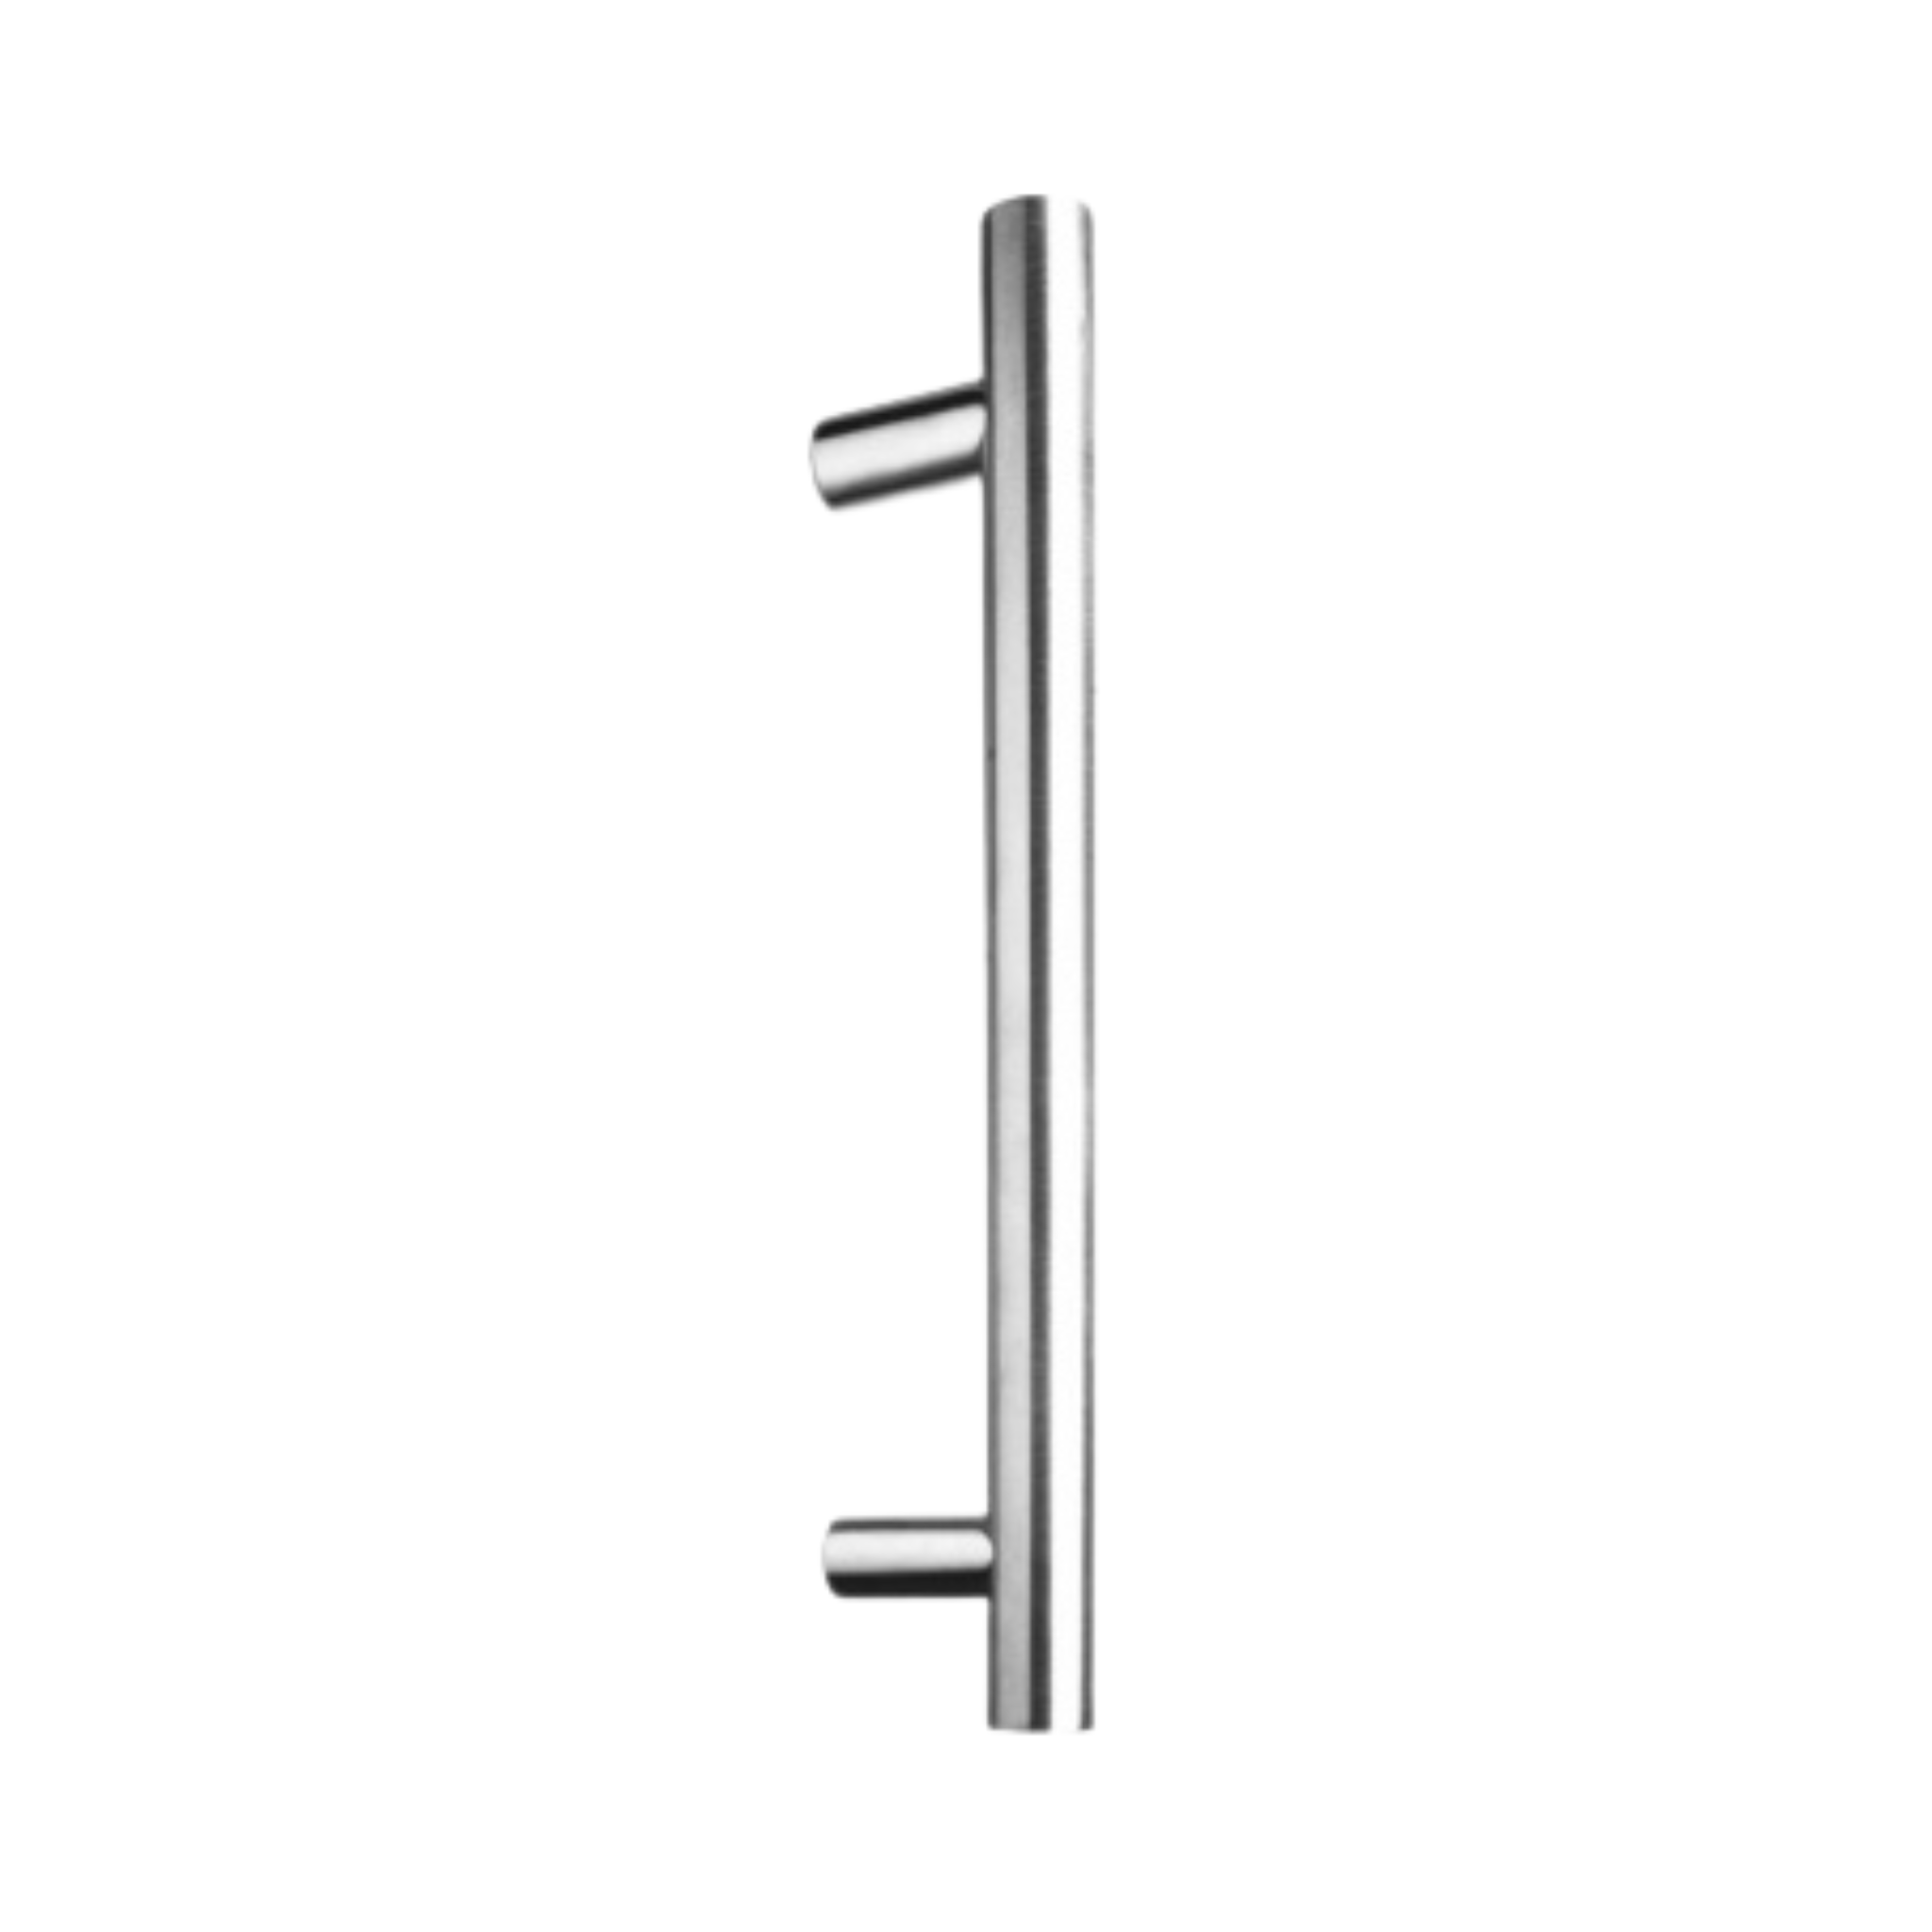 QS2501/1 T Handle, Pull Handle, Round, T Handle, BoltThru, 30mm (Ø) x 500mm (l) x 400mm (ctc), Stainless Steel, QS